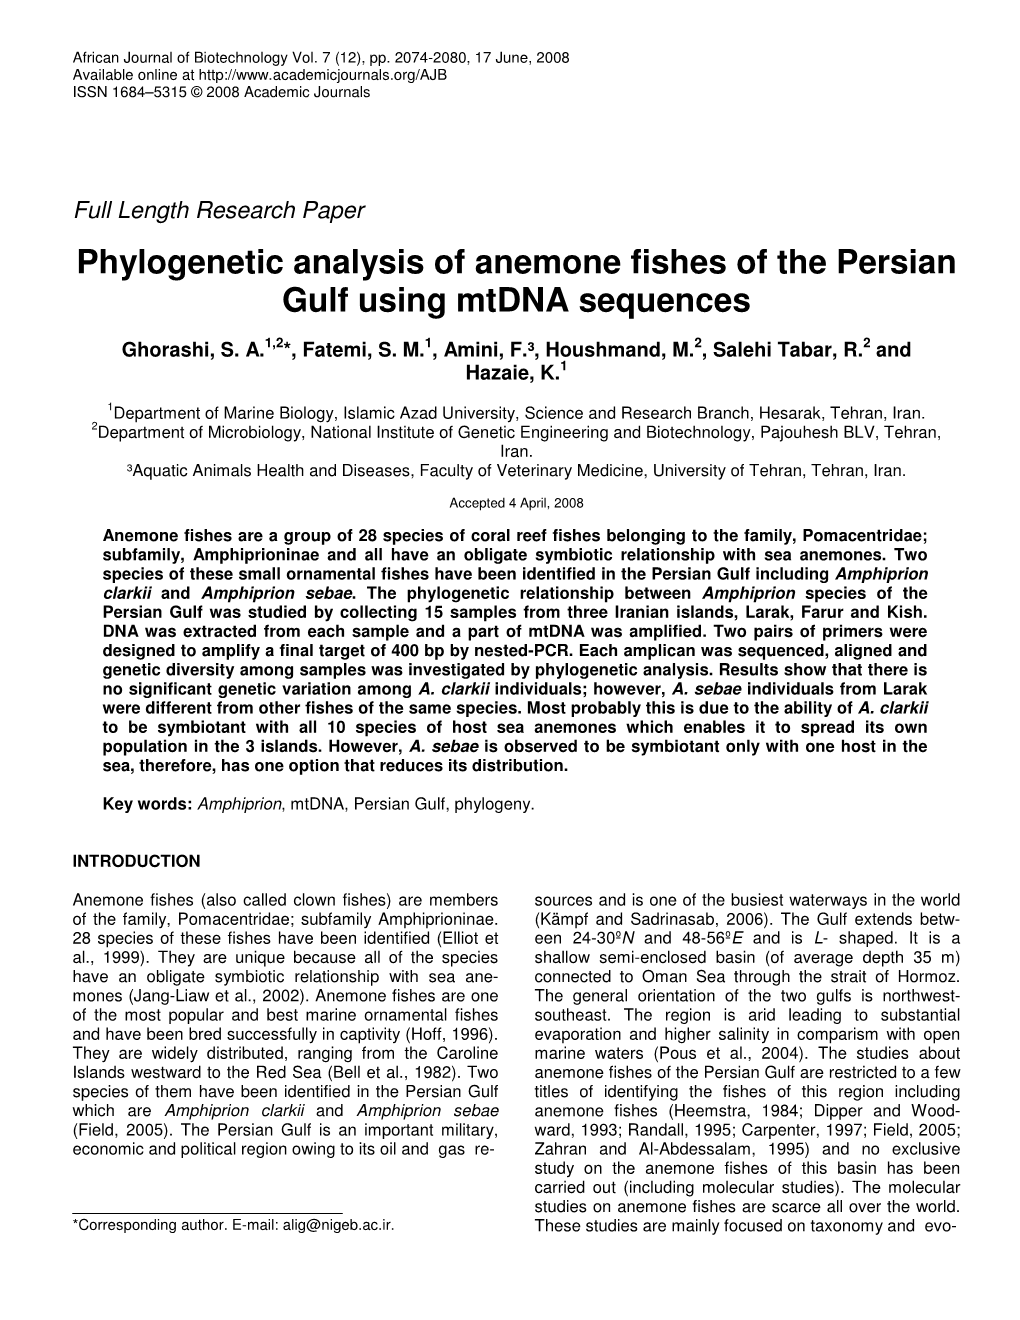 Phylogenetic Analysis of Anemone Fishes of the Persian Gulf Using Mtdna Sequences